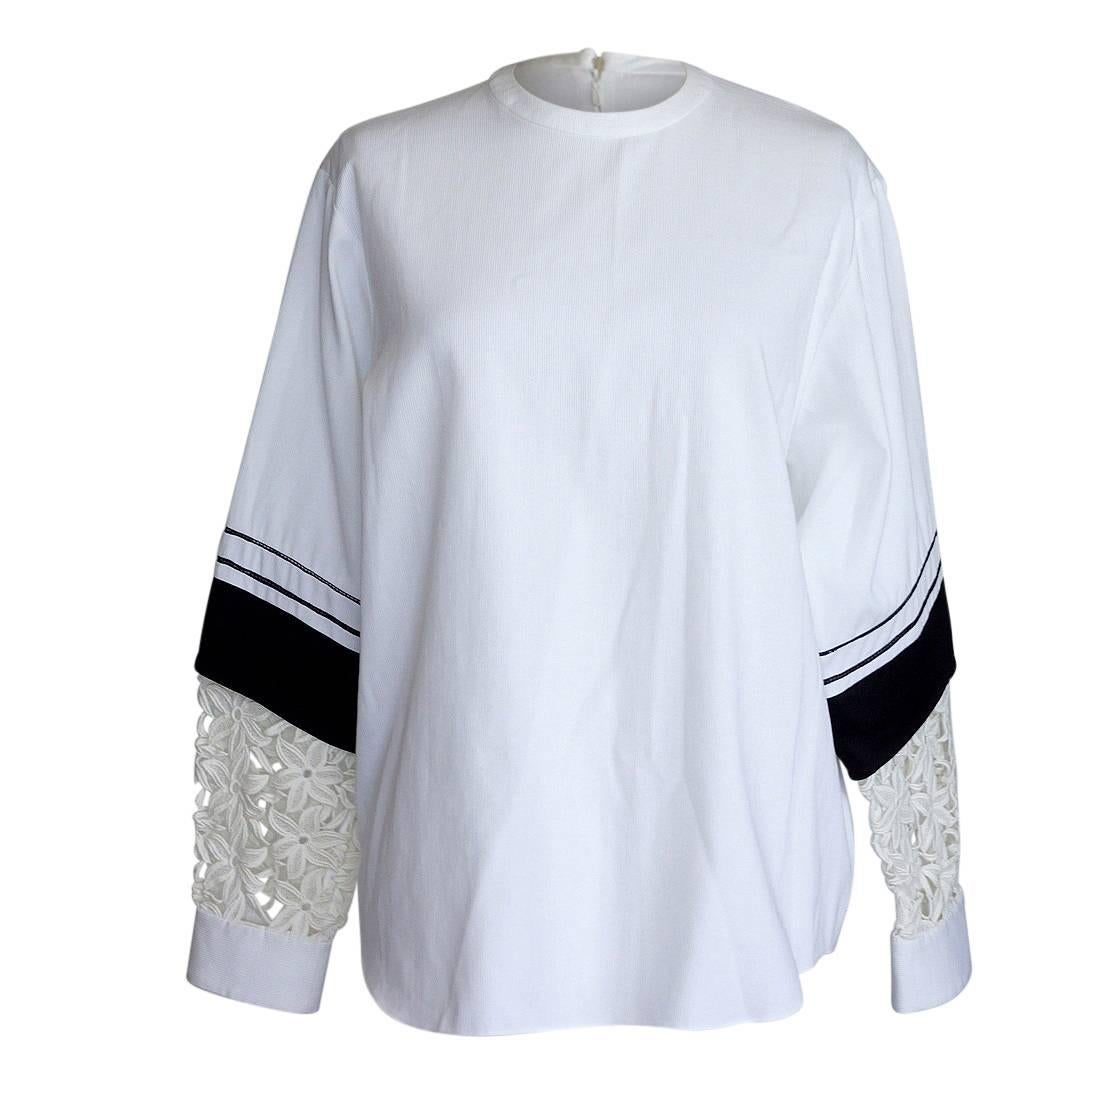 Chloe Black and White Unique Sleeve Flower Cutout Tunic Top  